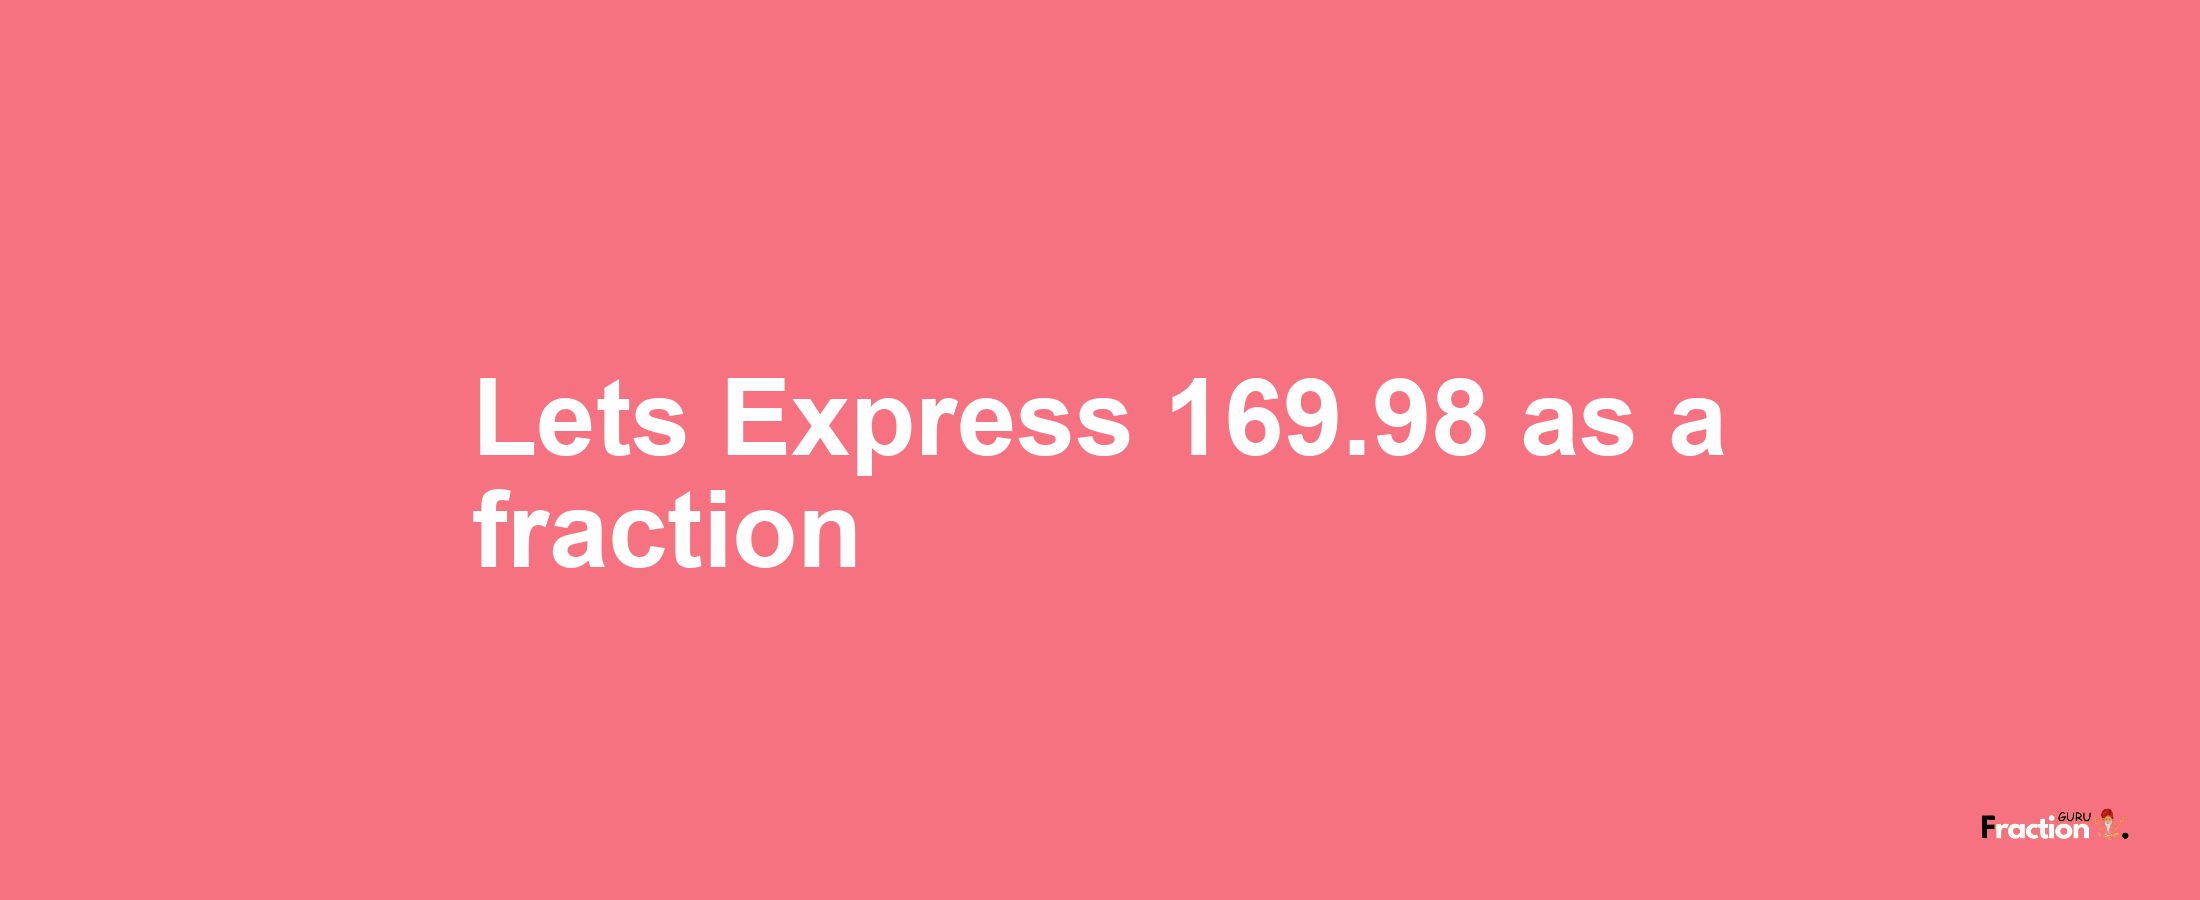 Lets Express 169.98 as afraction